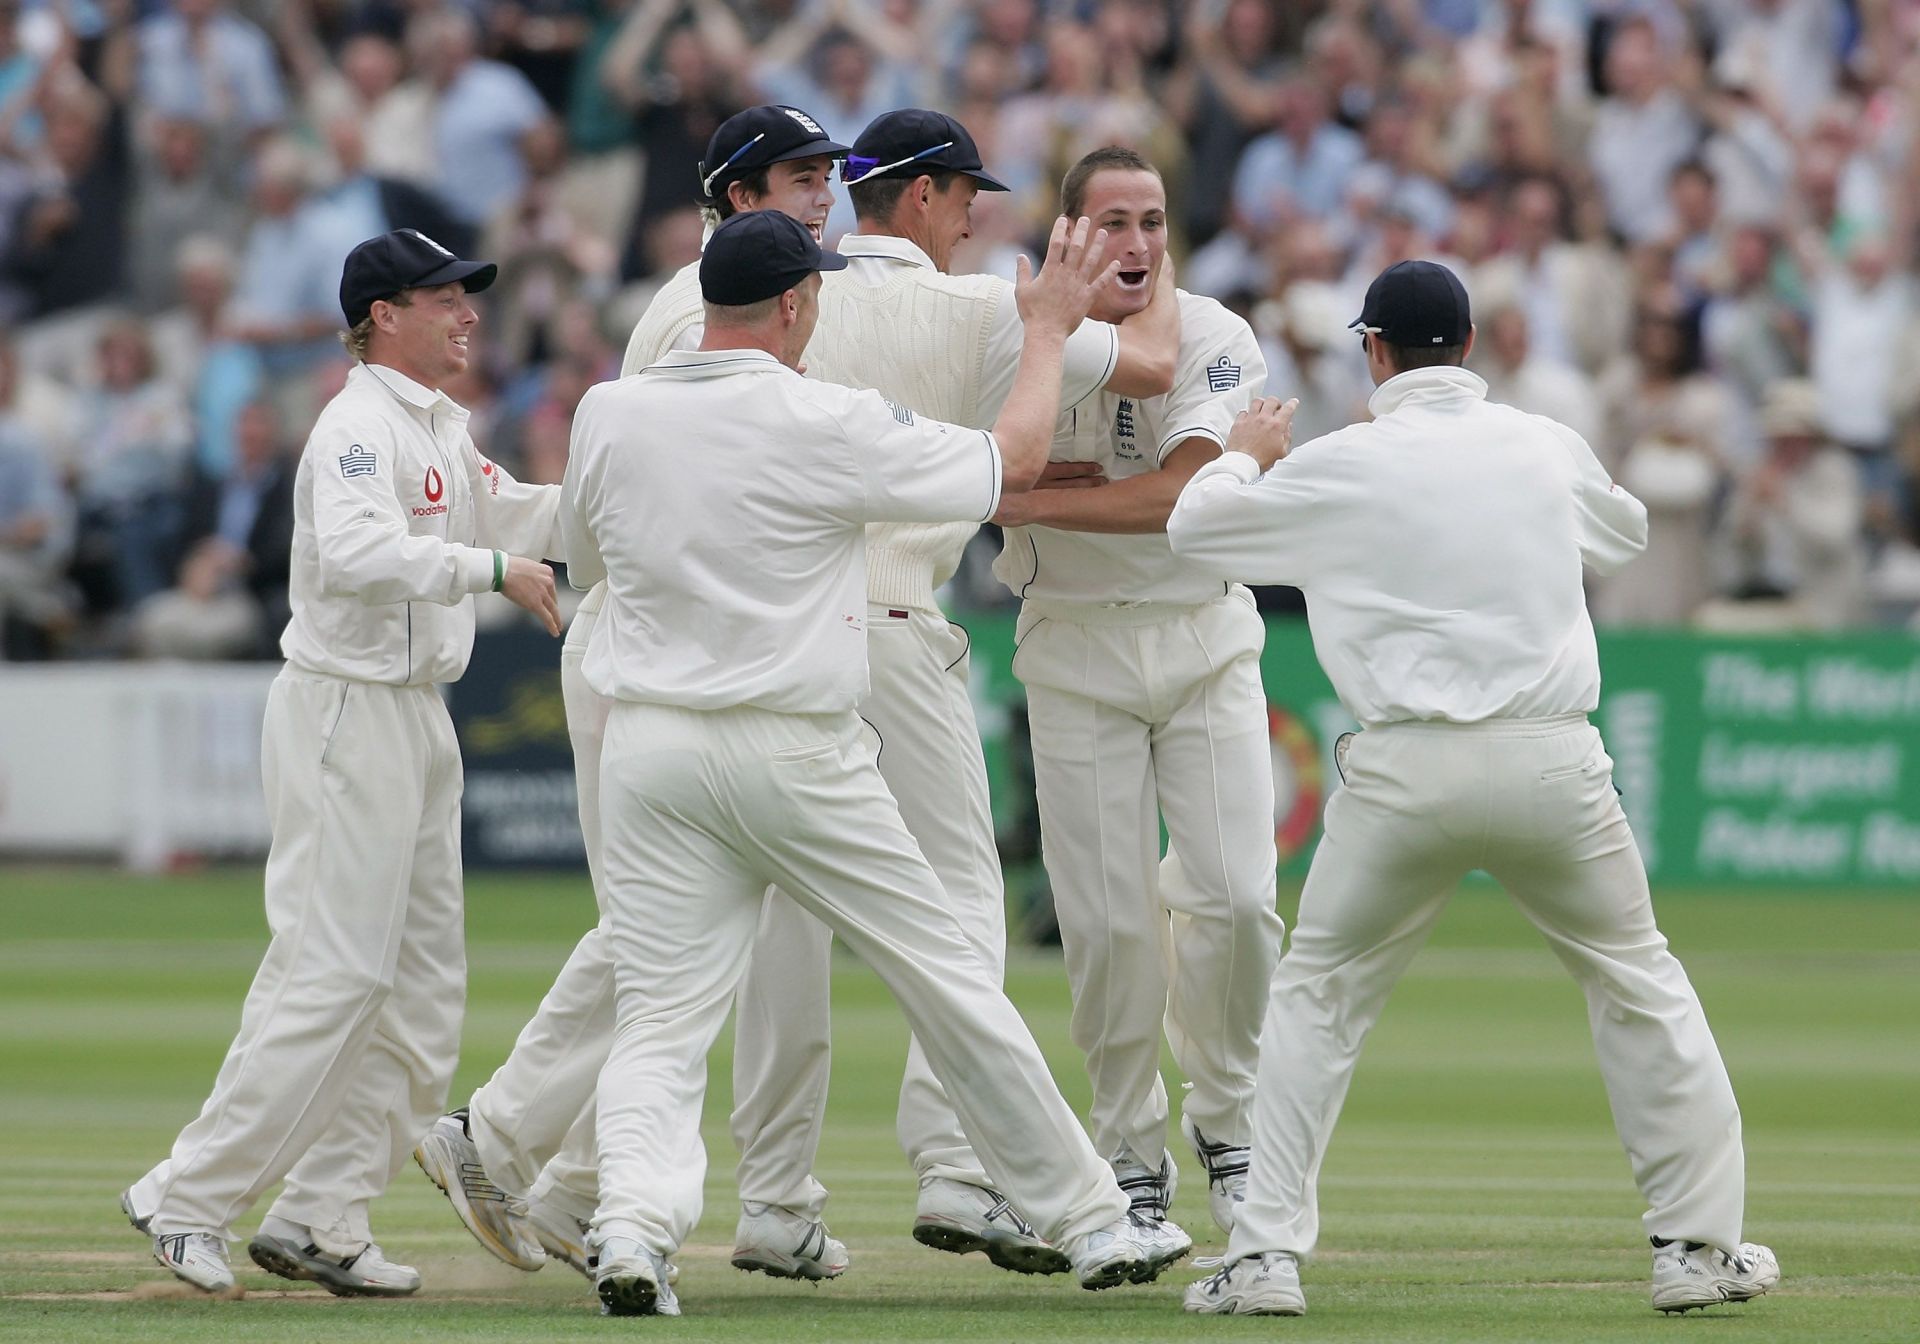 England celebrate a wicket during Ashes 2005. Pic: Getty Images